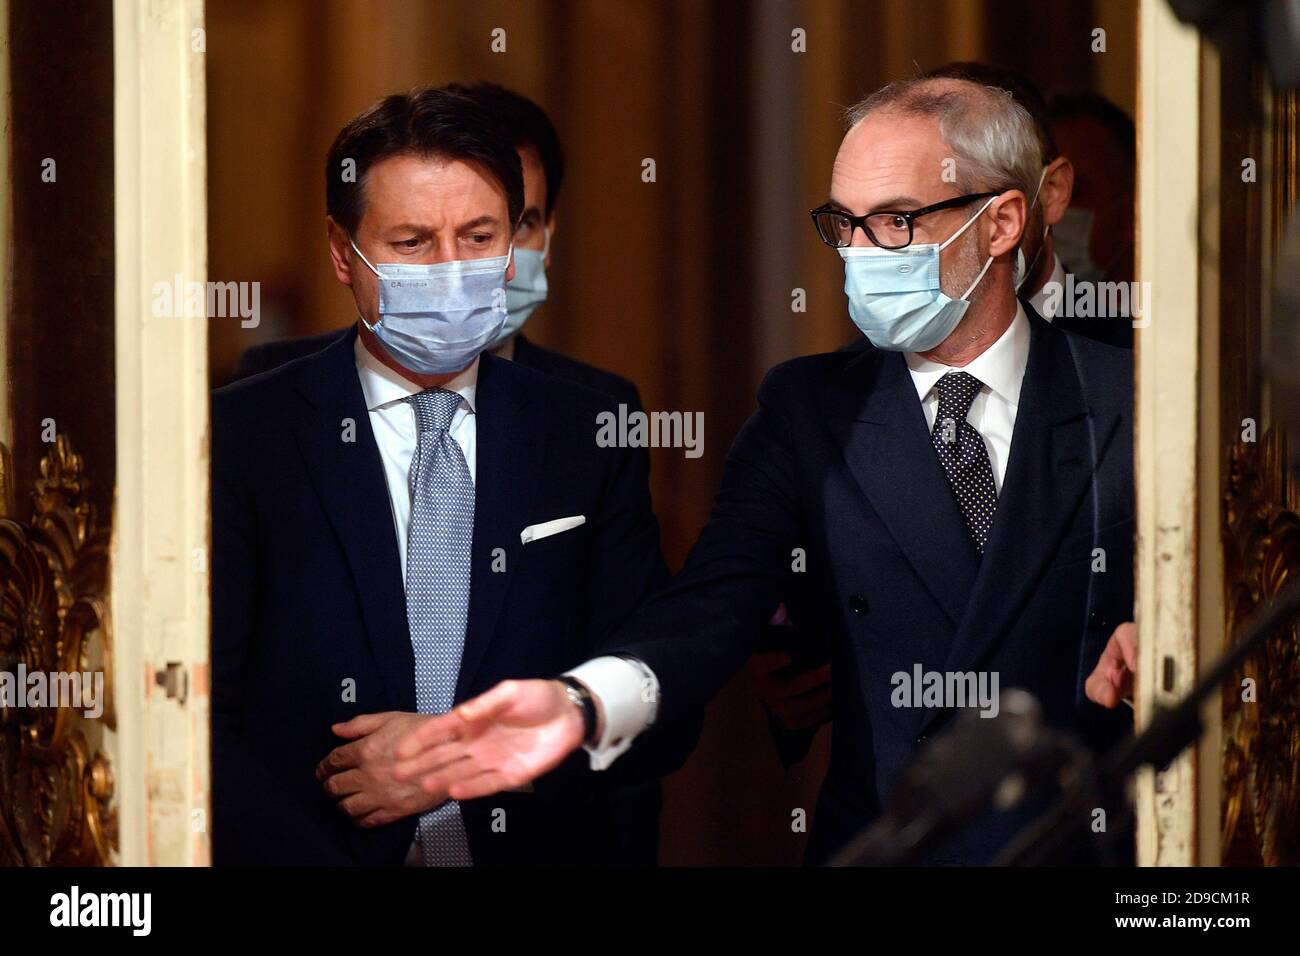 Rome, Italy. 04th Nov, 2020. The Italian Prime Minister Giuseppe Conte wearing a face mask during the press conference about the Government decree containing new measures to contrast Covid-19 emergency. Italy will follow 3 kinds of different lockdown, depending on the diffusion of the pandemic in the different Regions. There will be red, orange and yellow zones. Rome (Italy), November 4th 2020 Photo Pool Alessandro Serrano' Insidefoto Credit: insidefoto srl/Alamy Live News Stock Photo